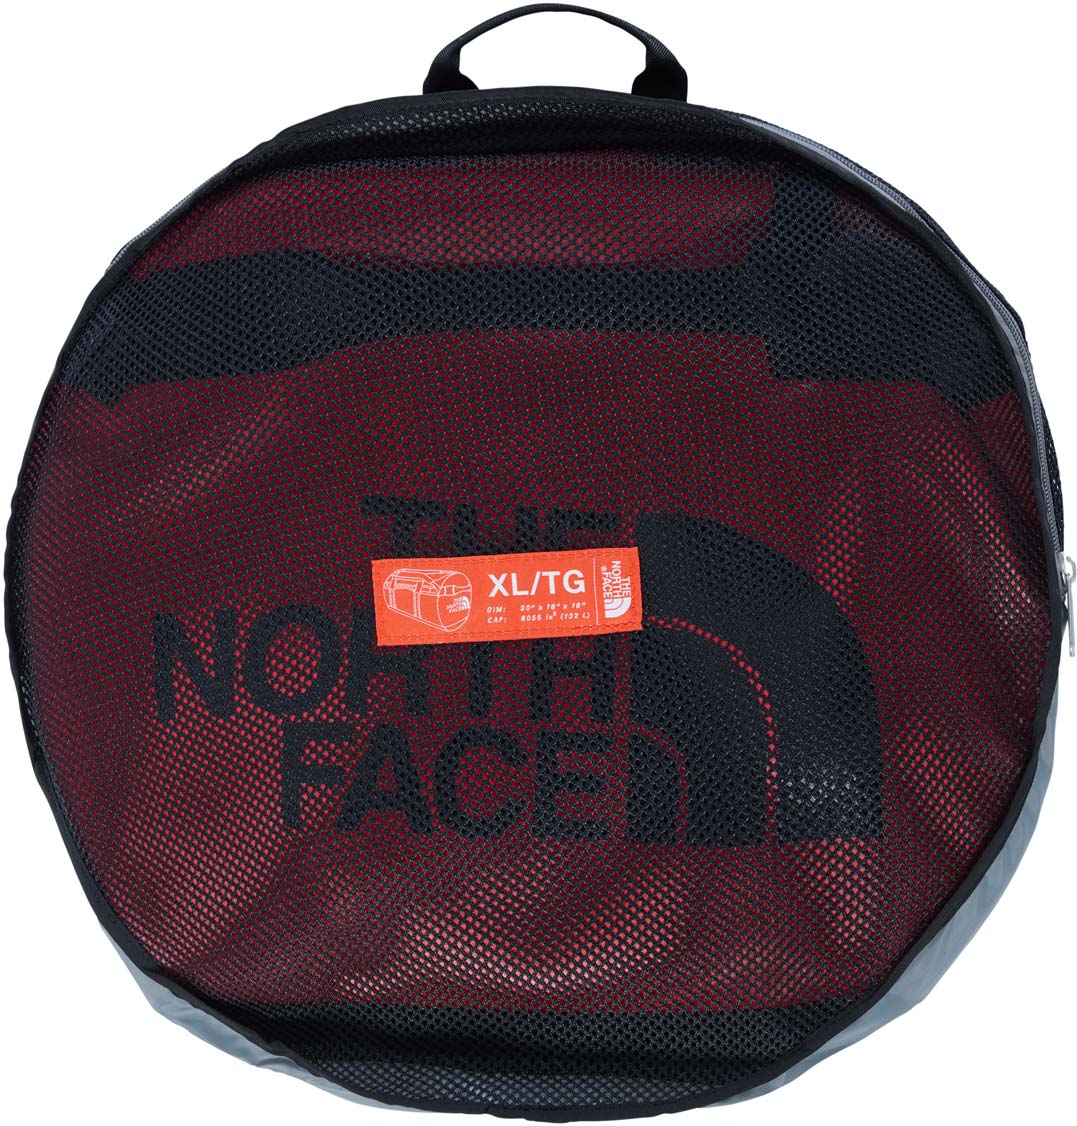 the north face xl tg